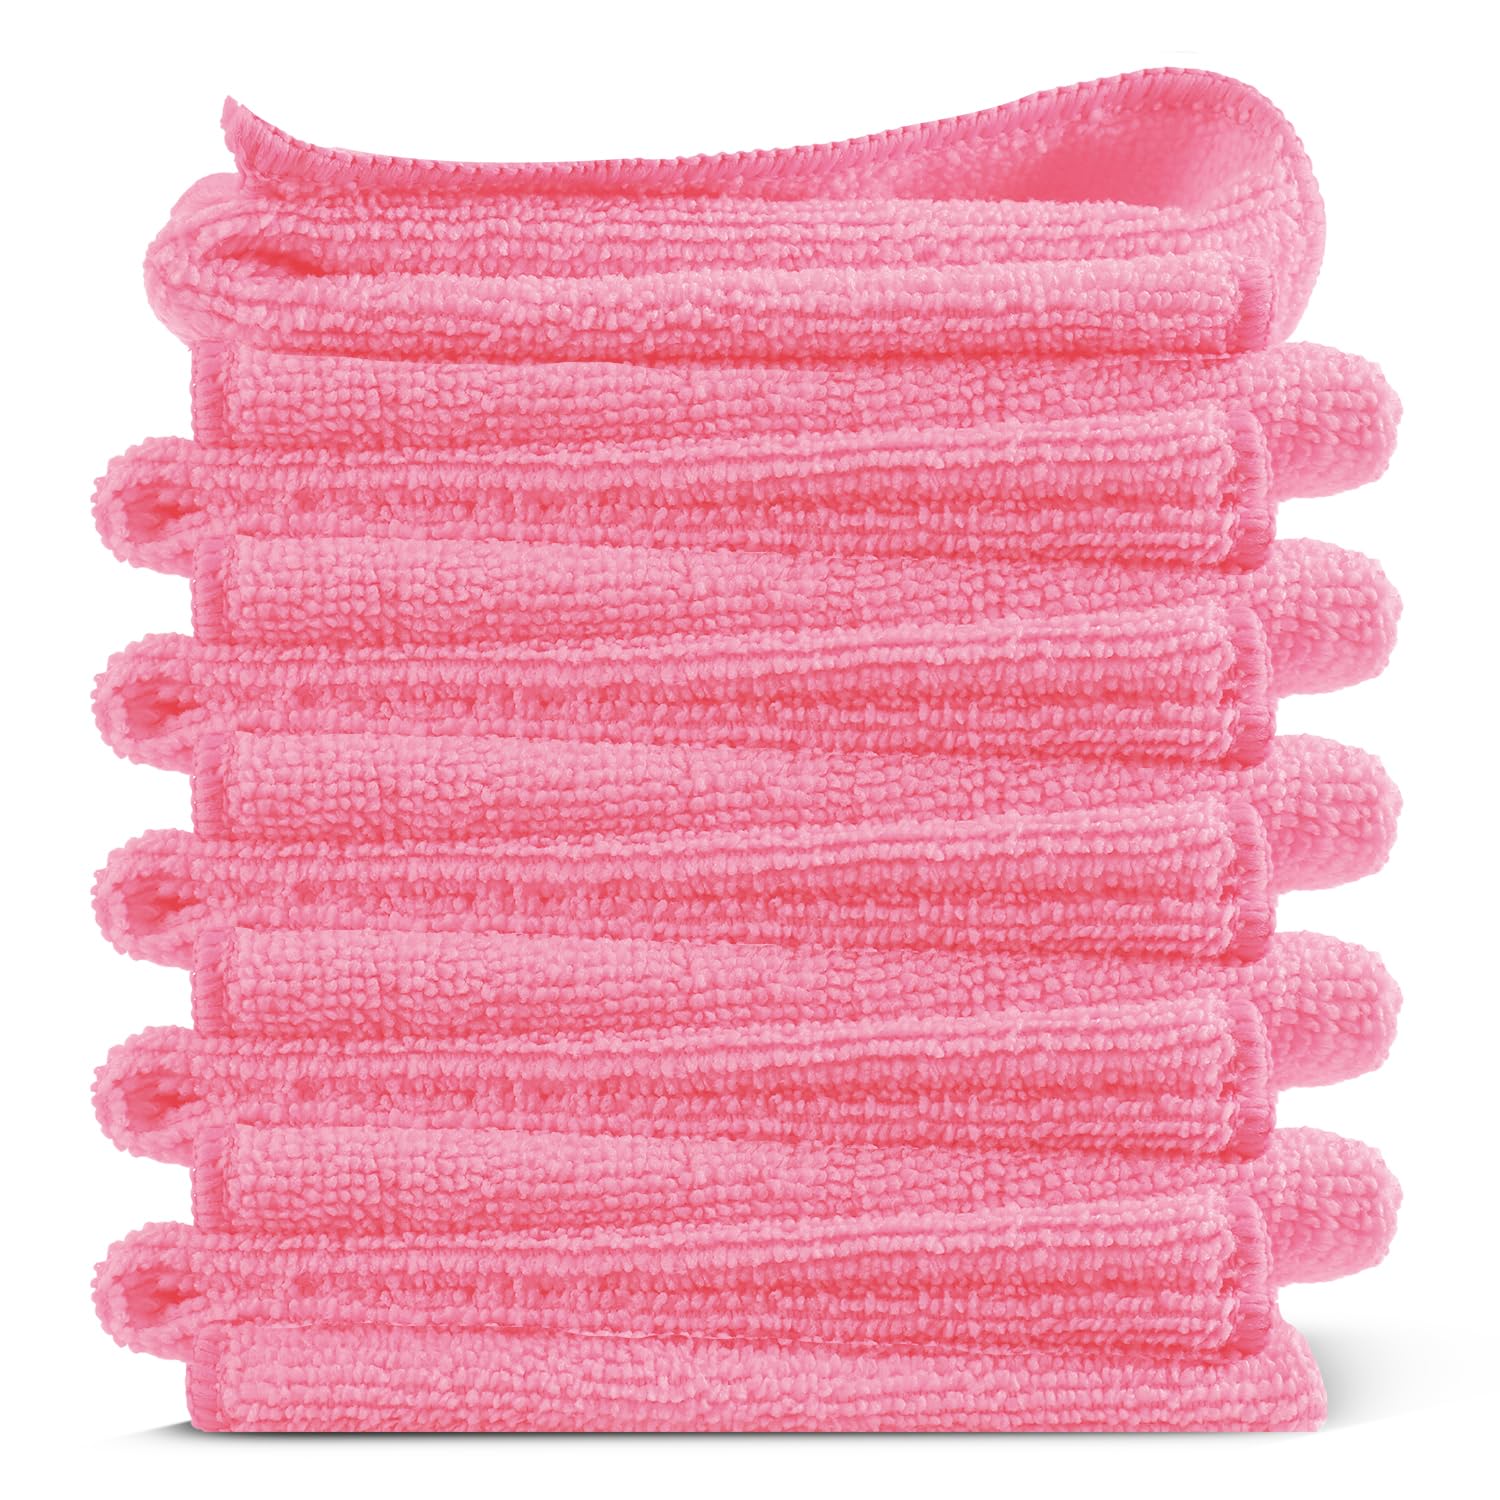 Hearth & Harbor Microfiber Cleaning Cloth, Microfiber Towels for Cars 12 Pack Washcloths, Pink Cleaning Rags, Reusable Microfiber Towel, Microfiber Cloth Rags for Cleaning, Lint Free Cloth